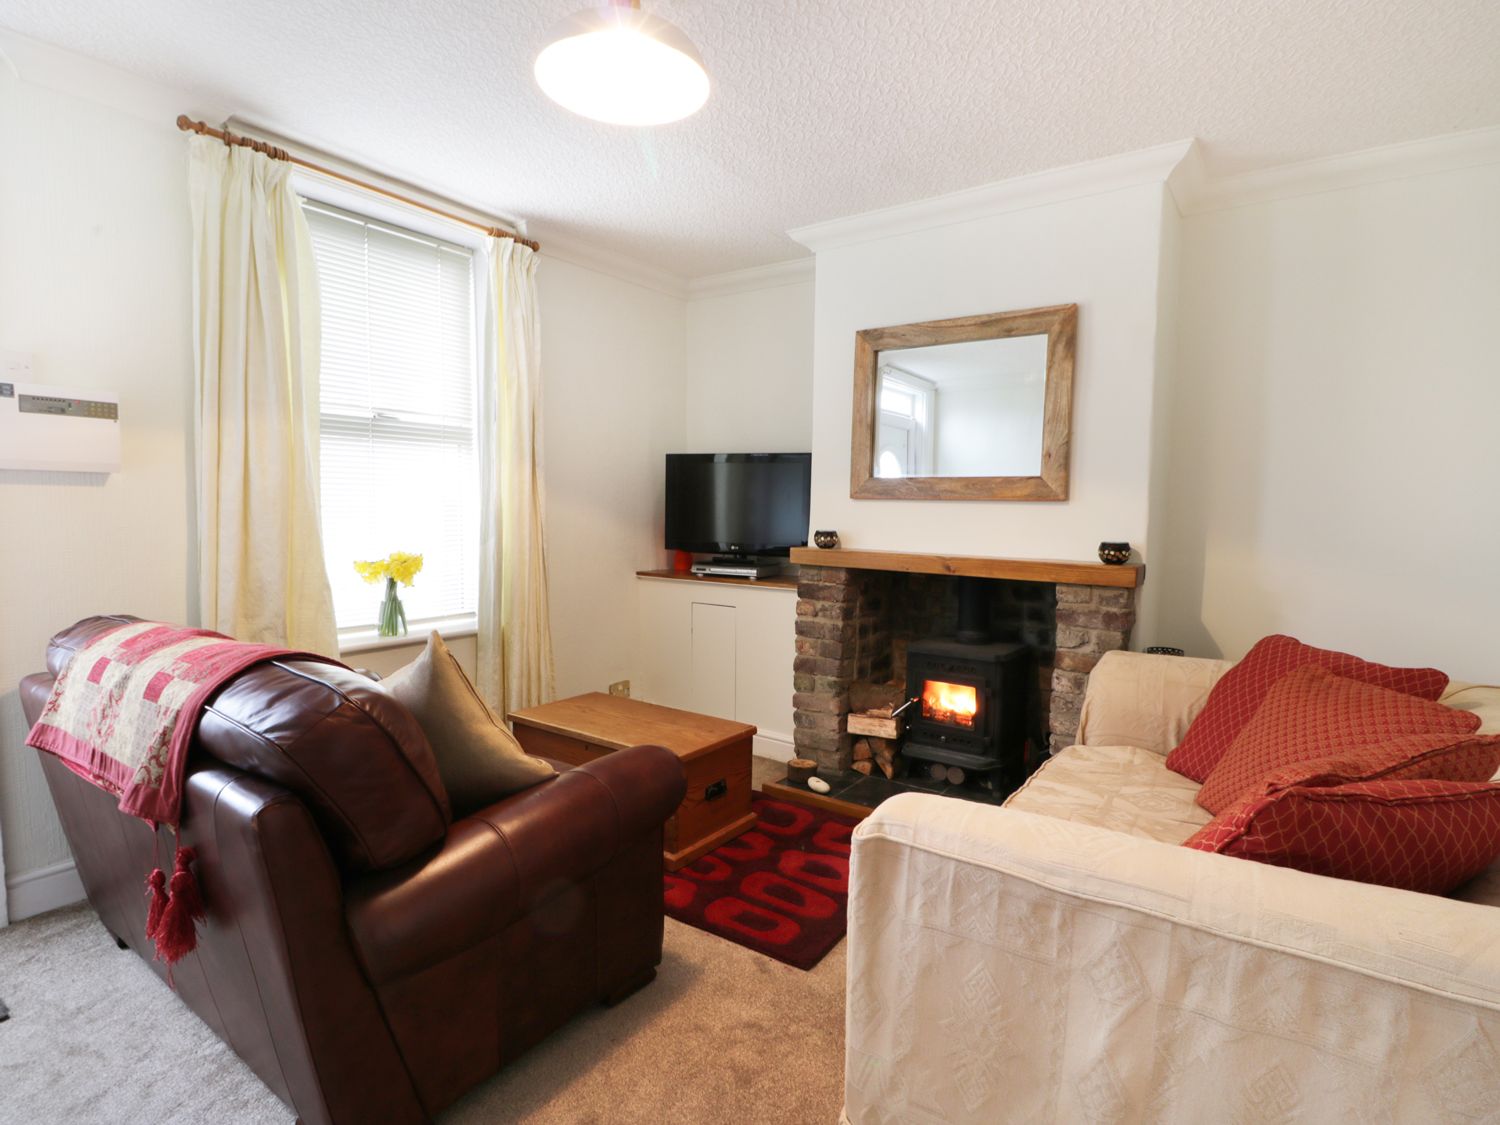 3 North View Terrace - North Yorkshire (incl. Whitby) - 962898 - photo 1